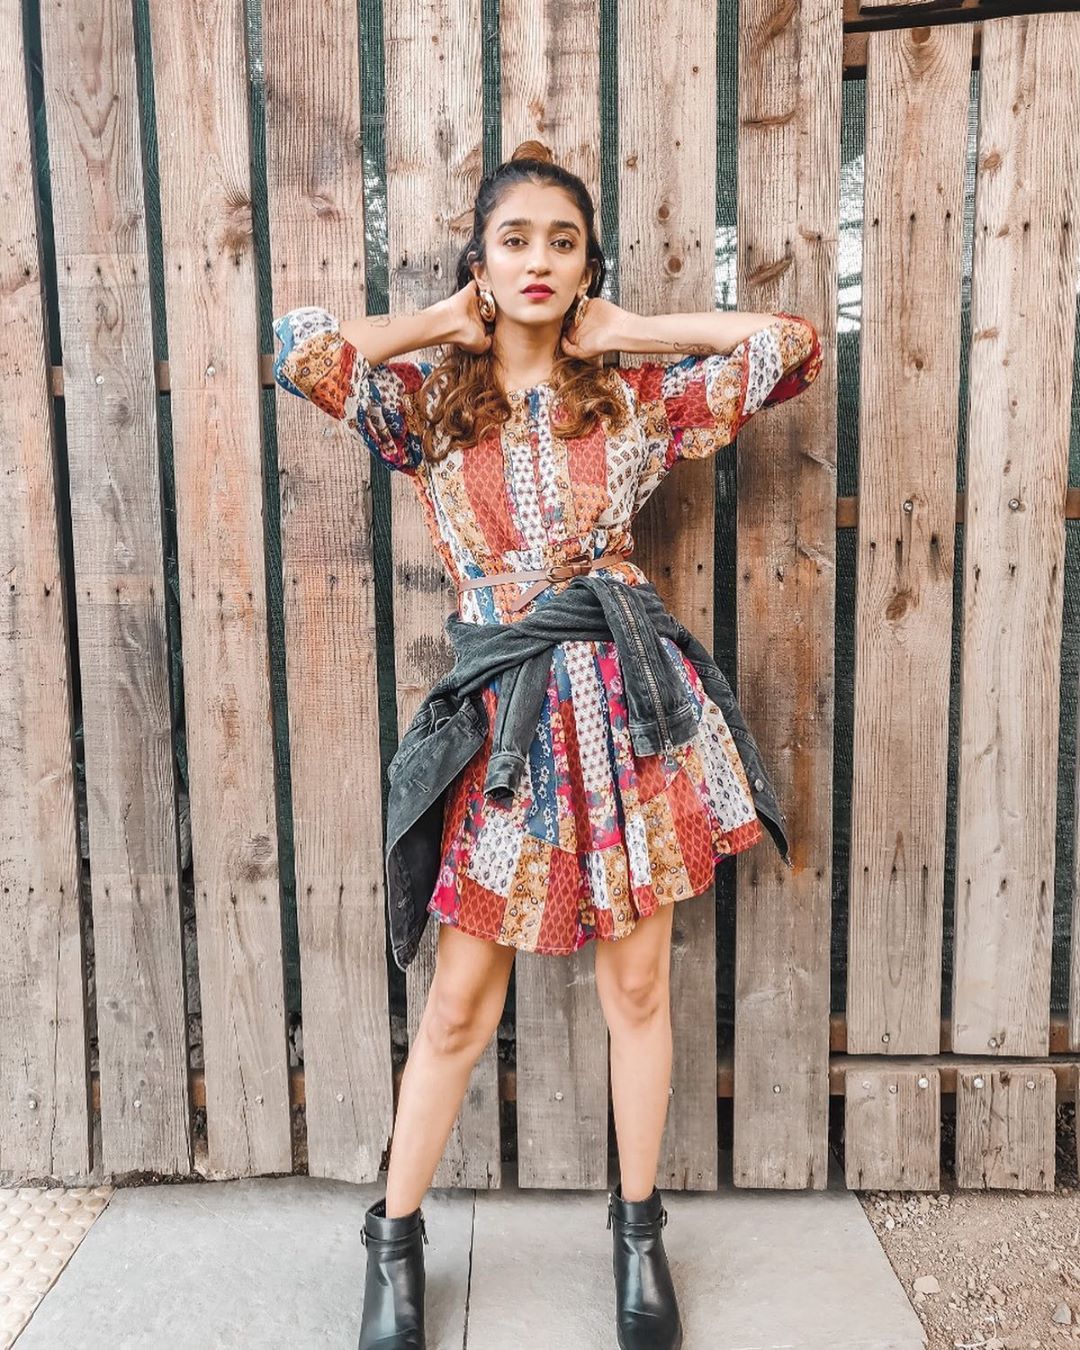 MYNTRA - Print play that spells your boho vibe! 📸@trushna_parekh
Look up product code: 10372475 
For more style inspiration, look up the binge-worthy fashion content at #MyntraStudio on the #myntra ap...